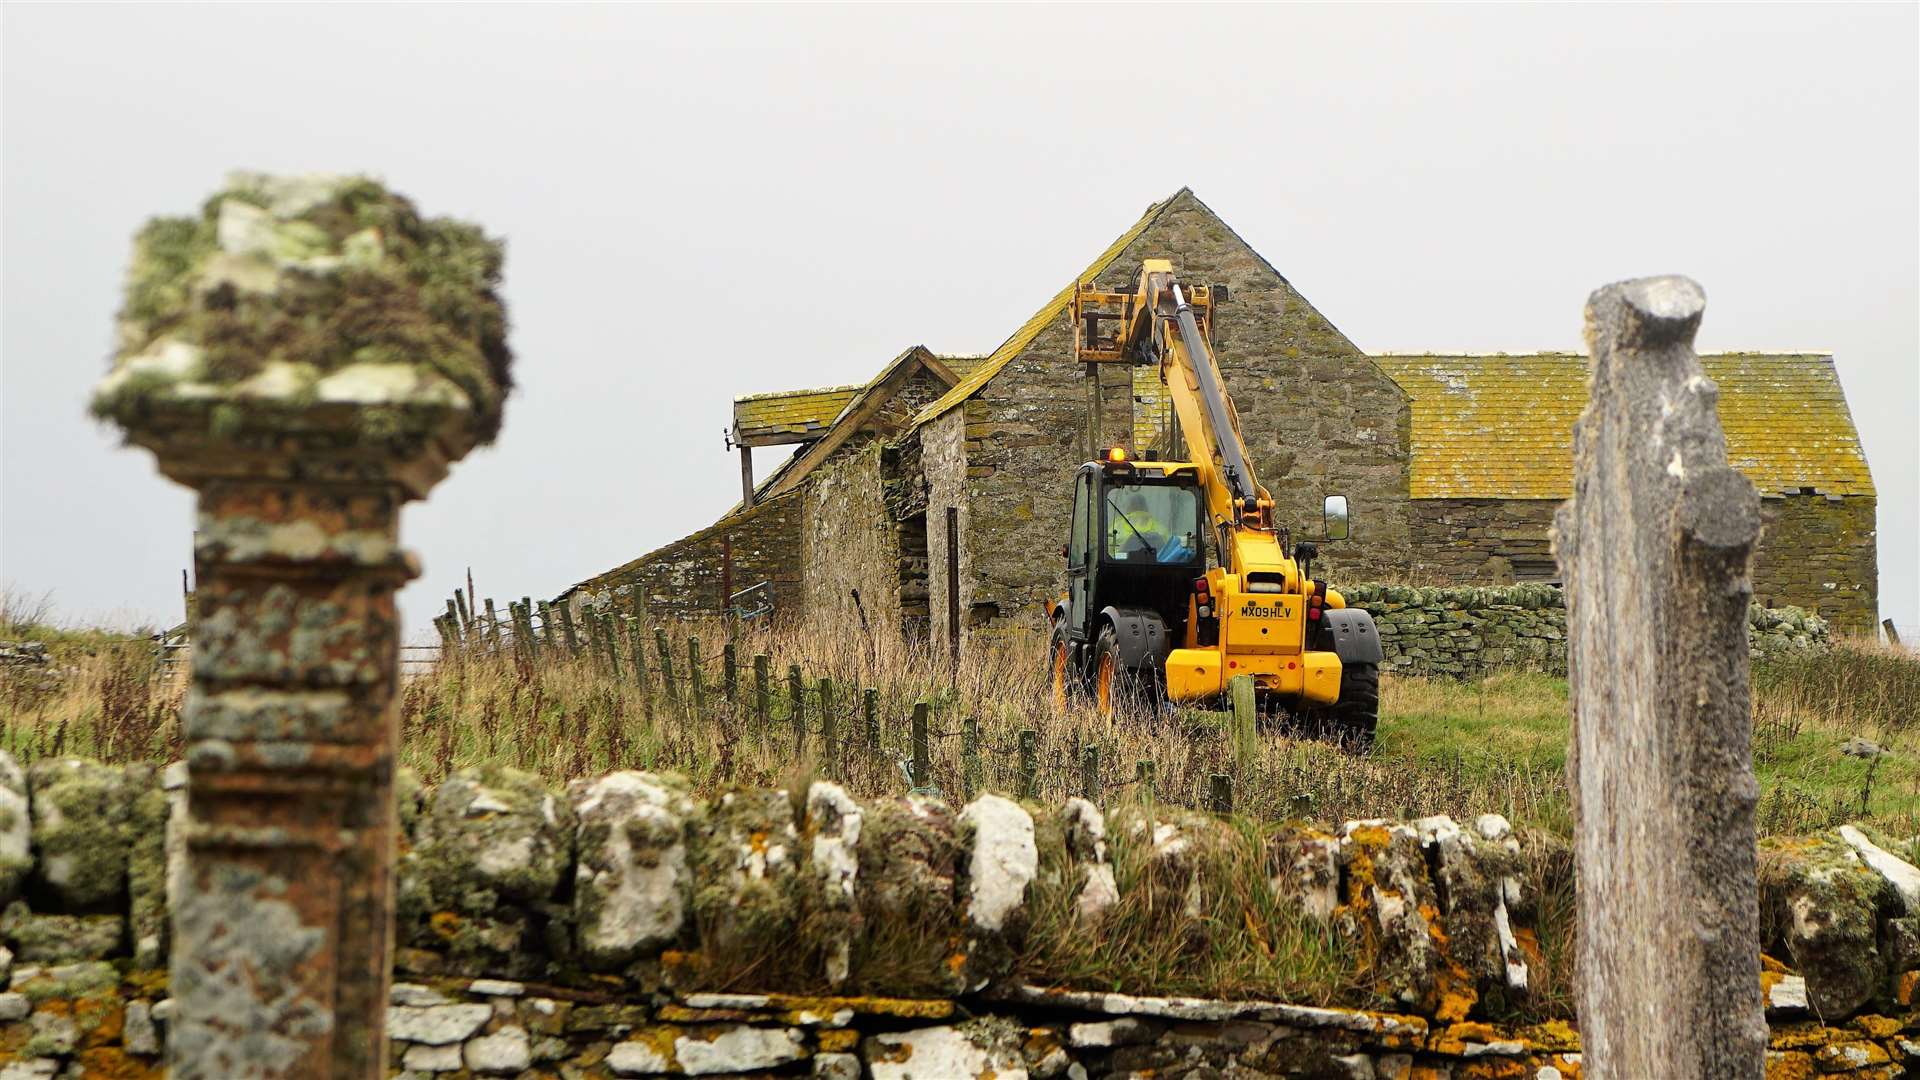 David Dunnett drives the JCB away from the site. Picture: DGS